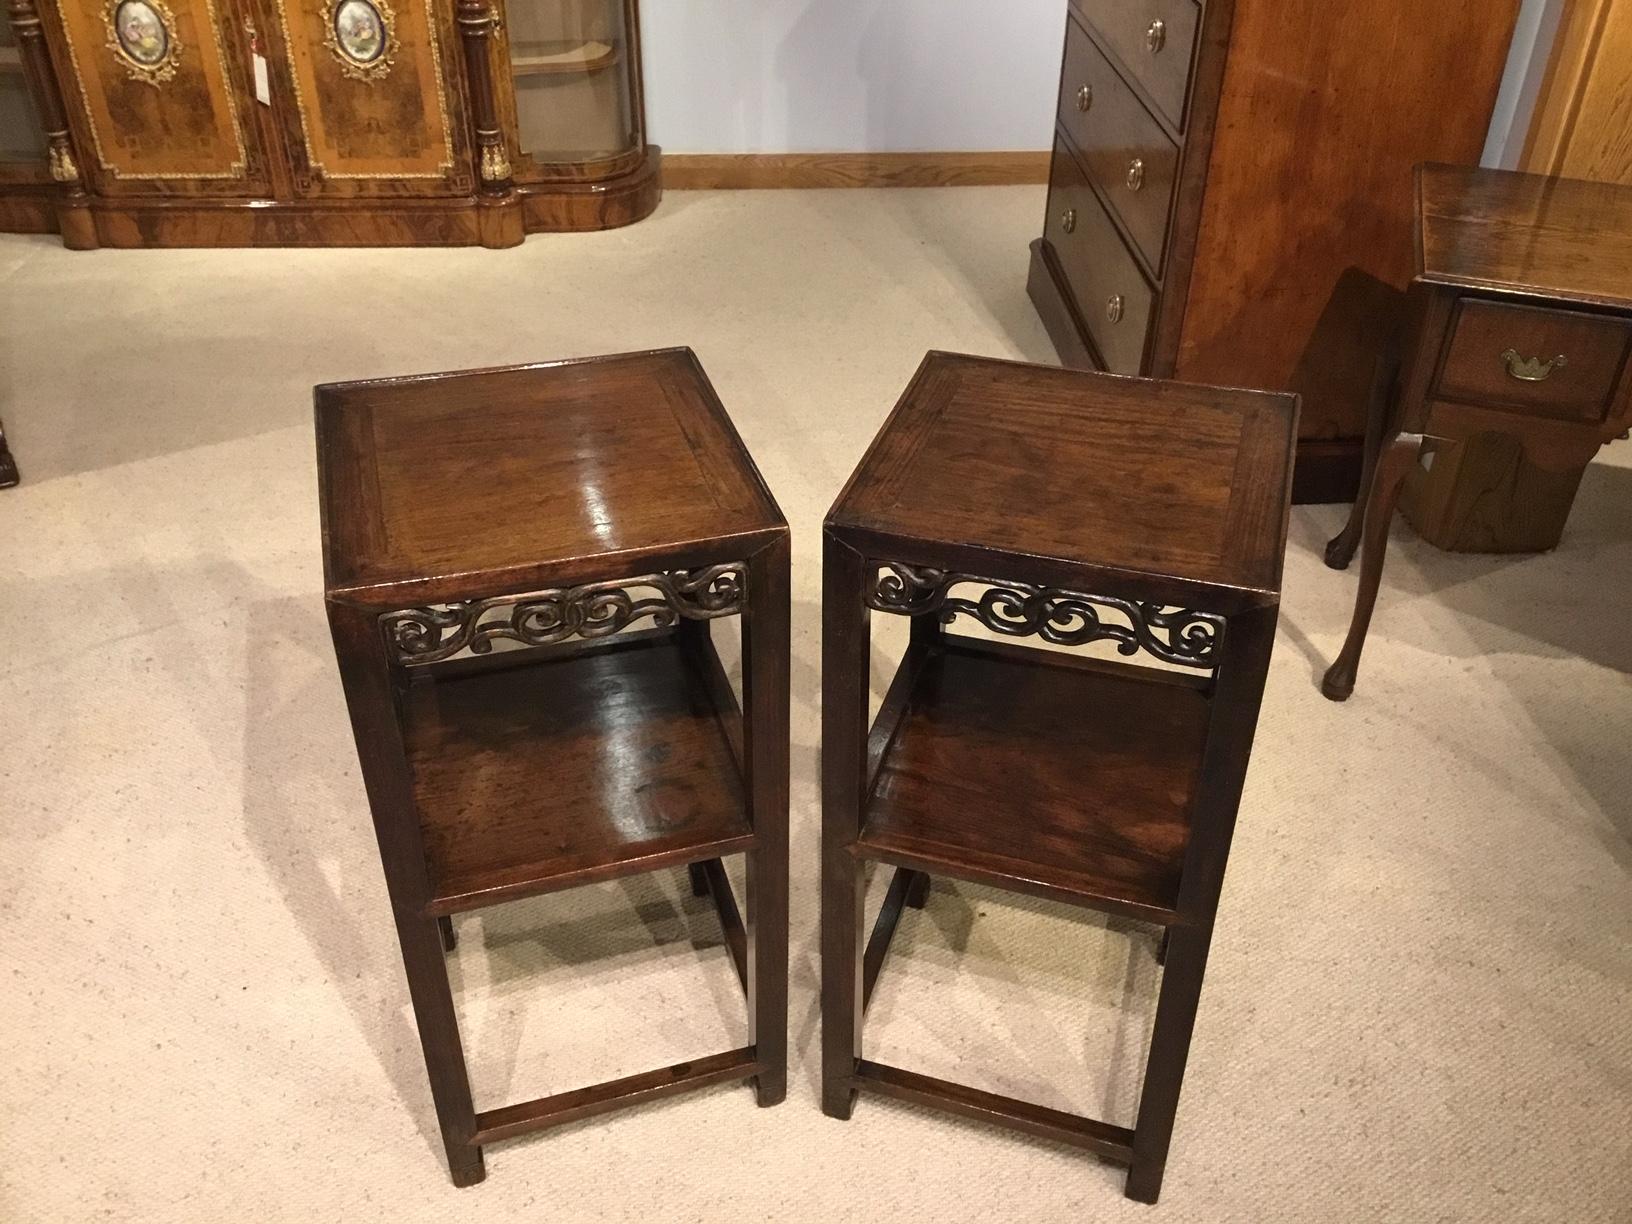 A pair of Chinese 19th century hardwood stands. Each having a square solid hardwood top with typical Chinese pierced frieze and lower shelf. Supported on square supports with stretchers. Chinese, circa 1880.

Dimensions: 14.5